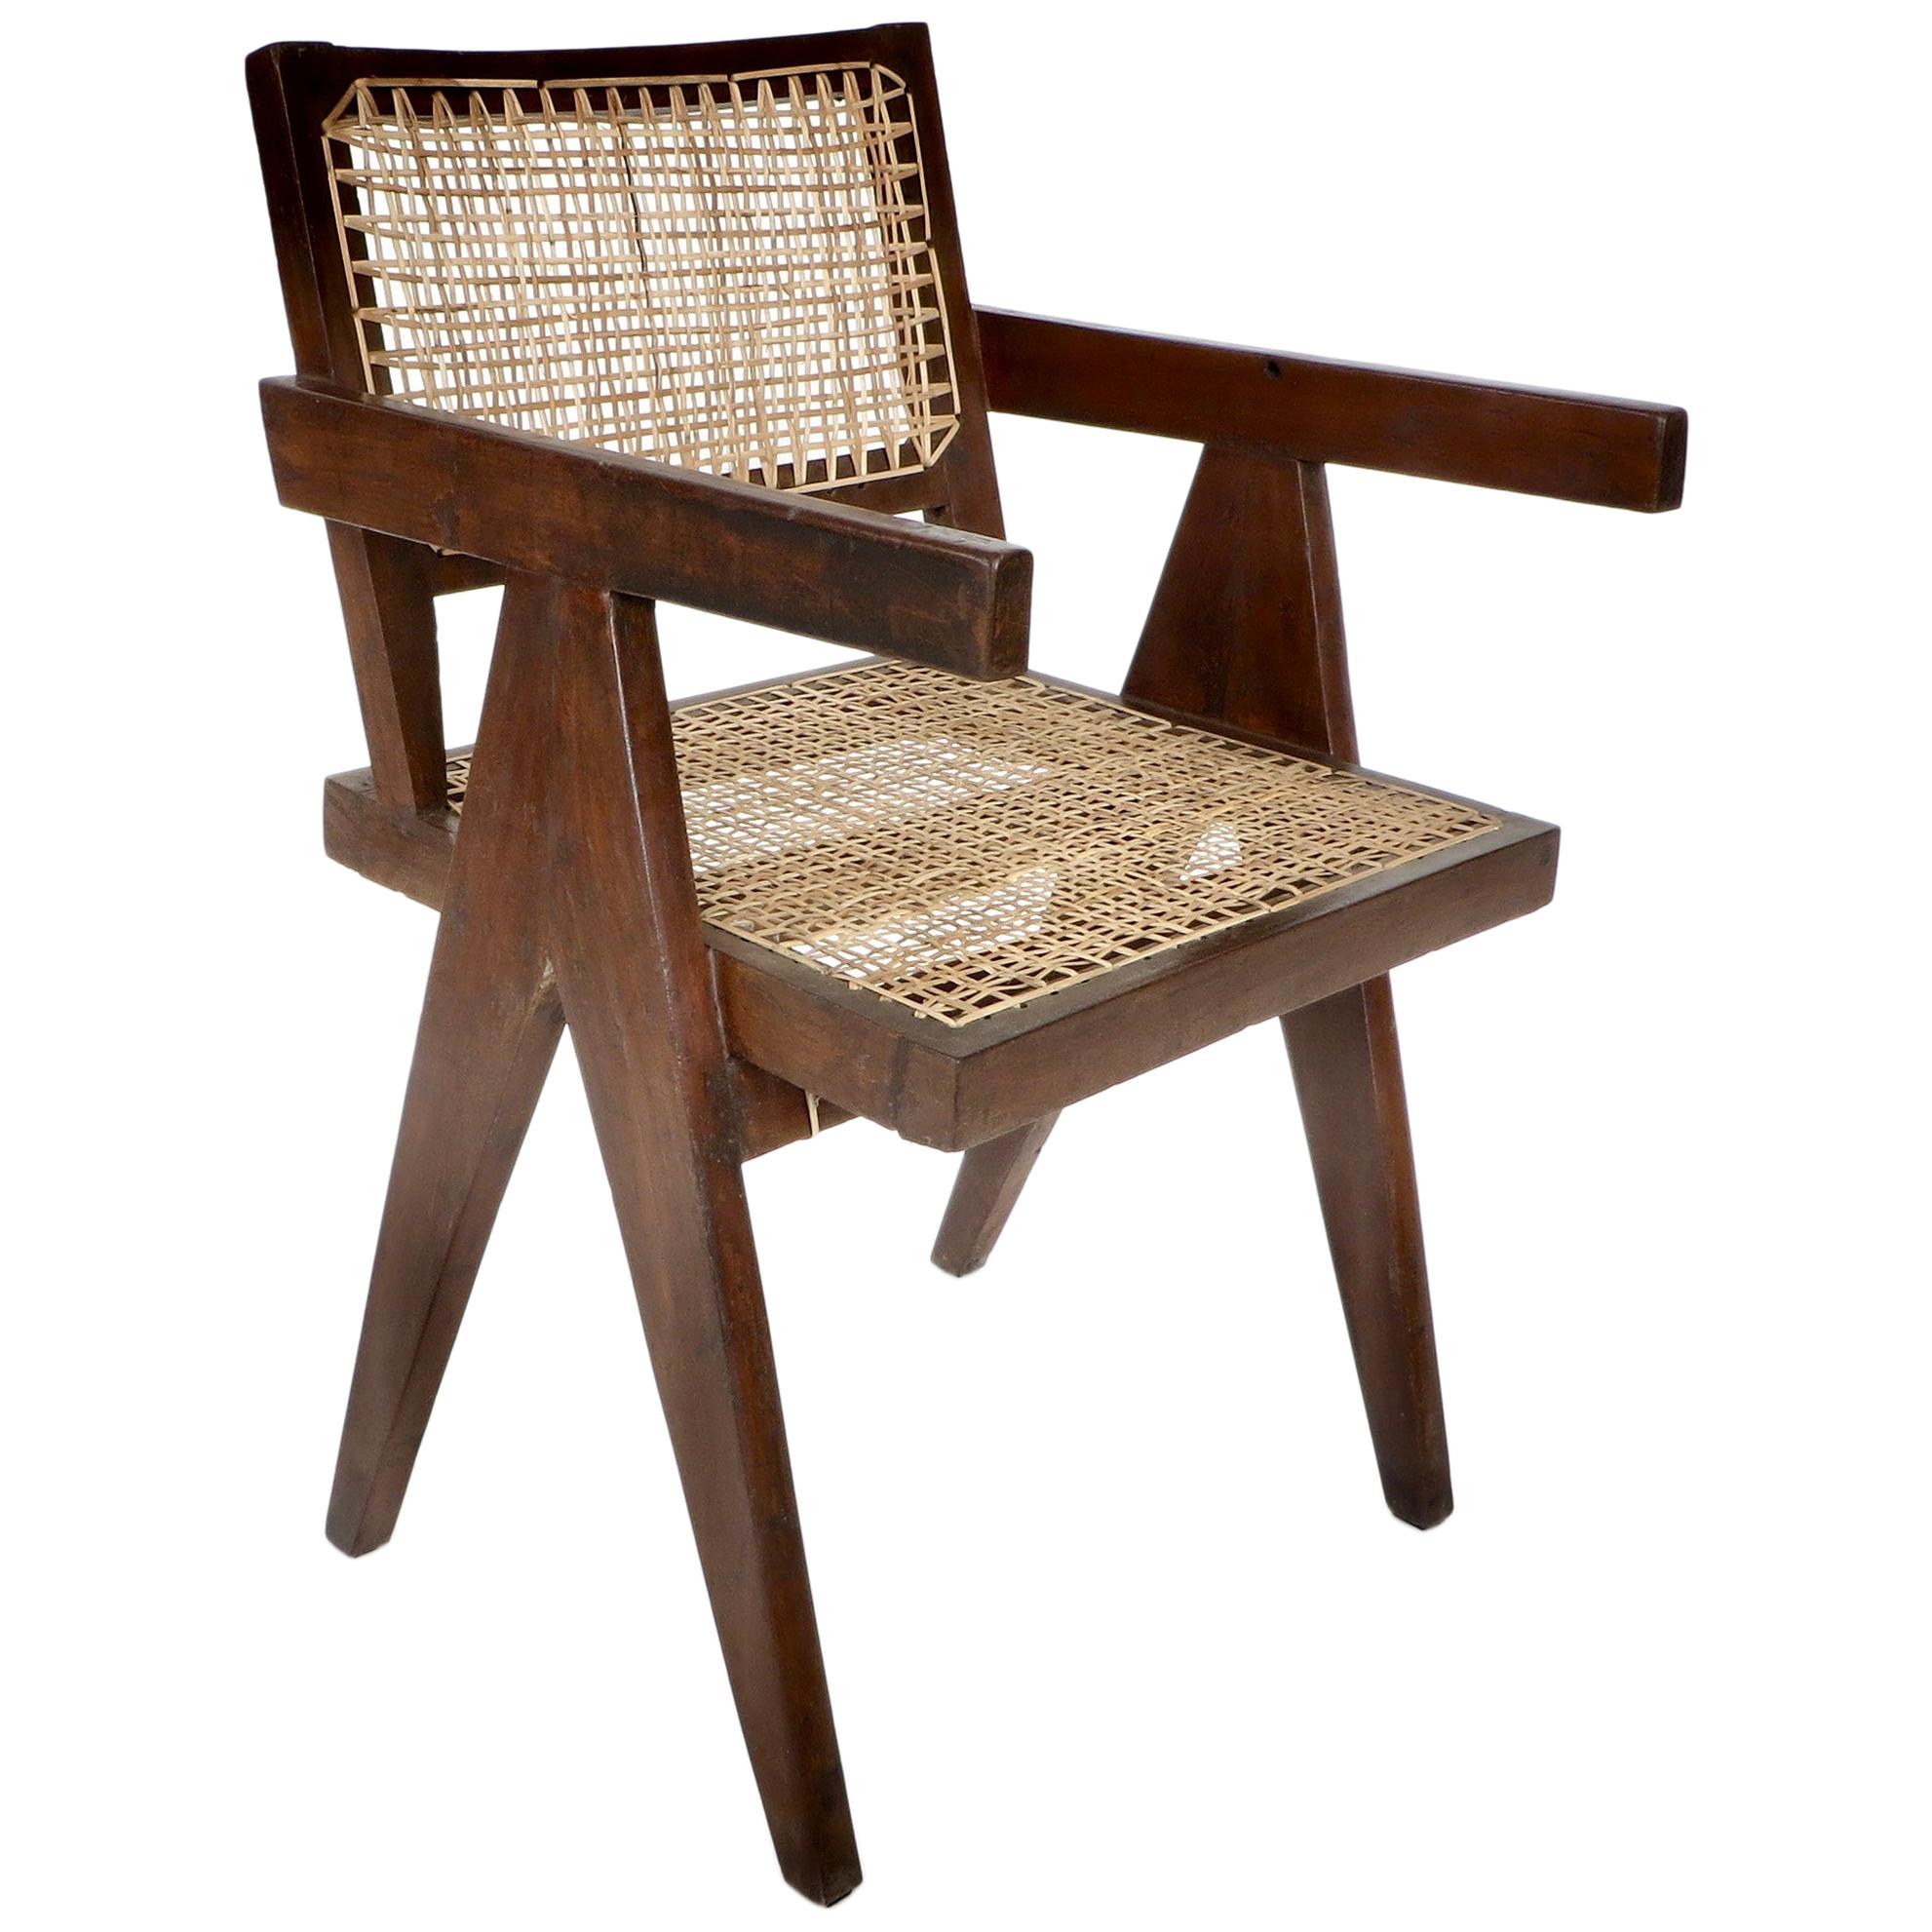 Pierre Jeanneret Teak and Cane Office Vintage Original Armchair from Chandigarh